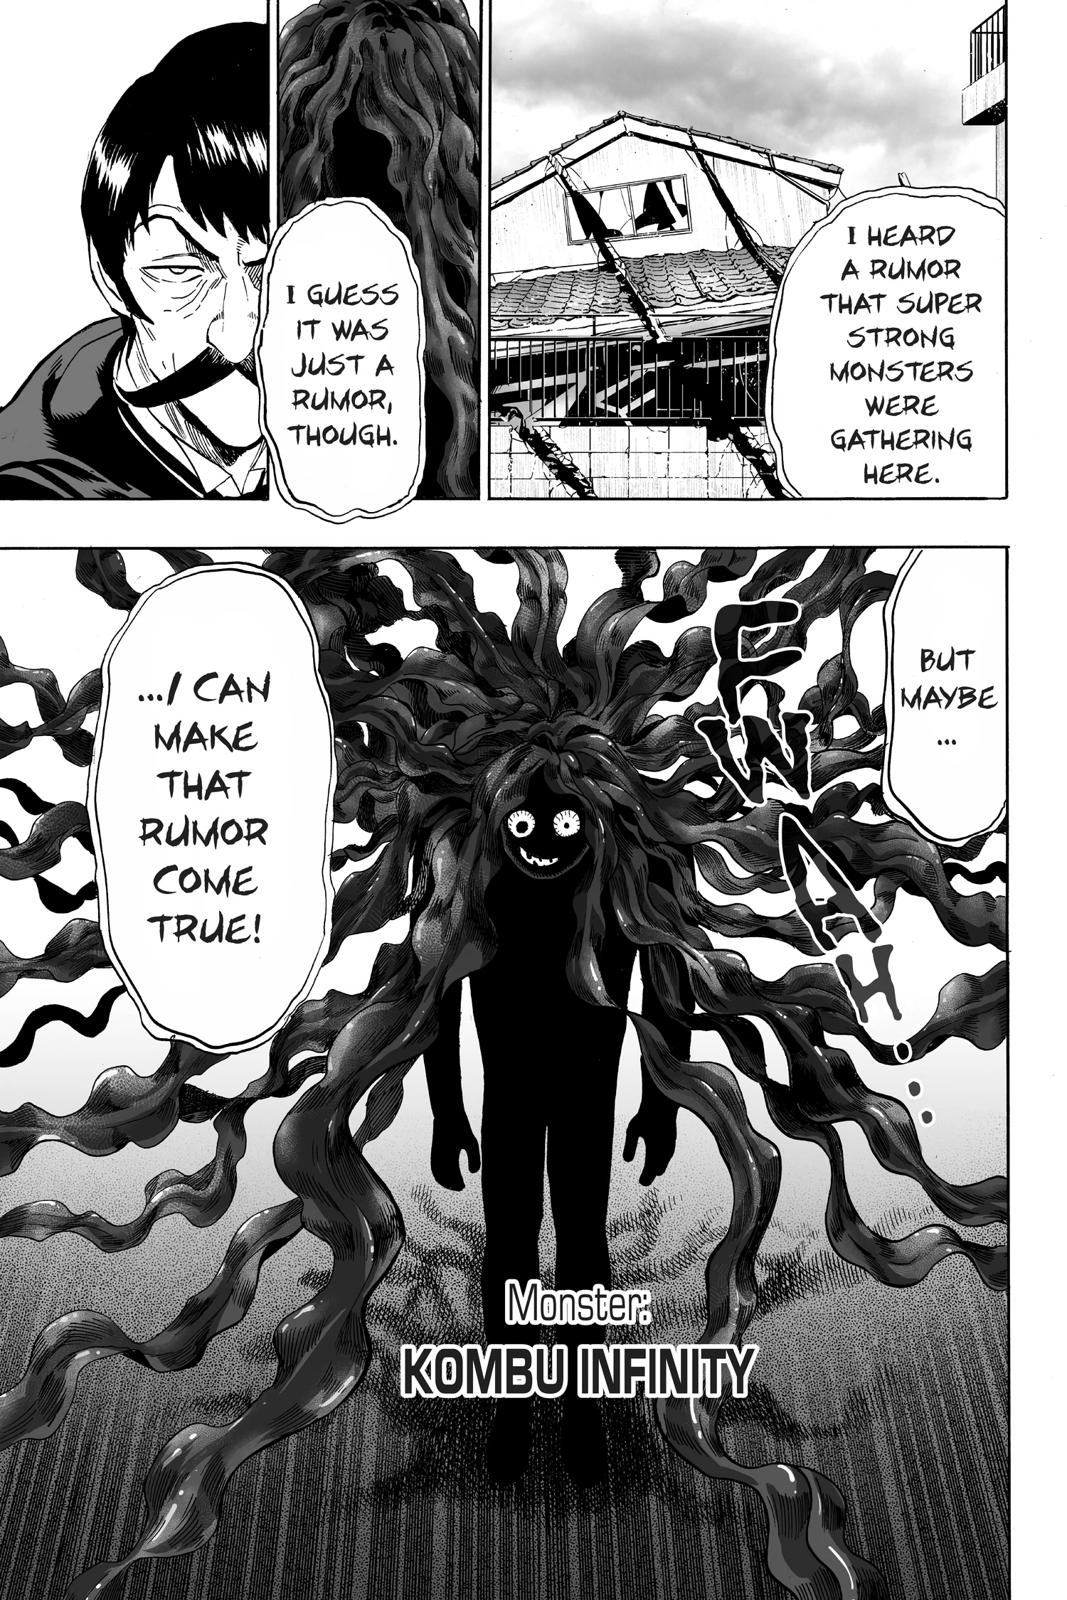 One-Punch Man, Punch 20 image 27